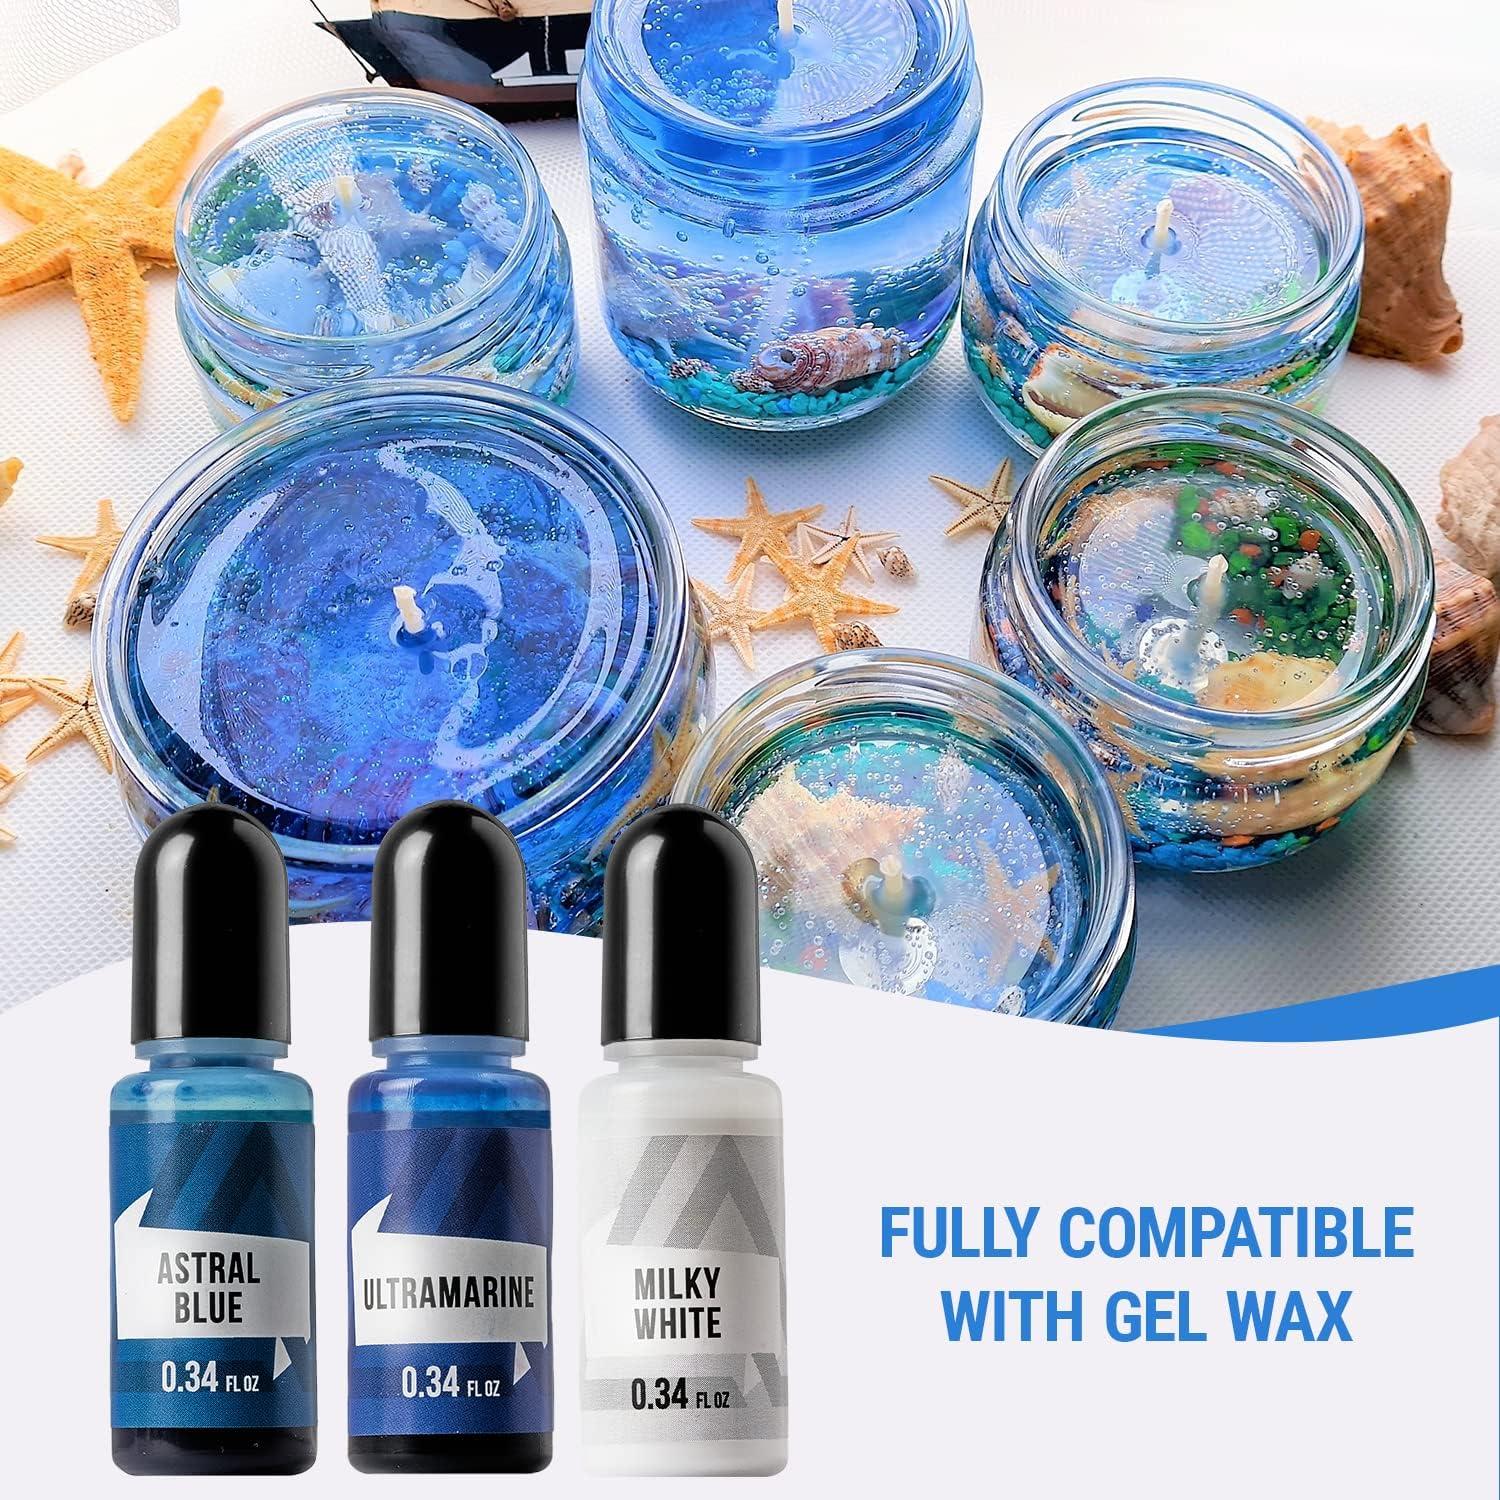 ALEXES Liquid Candle Dye for Candle Making Epoxy Resin Dye - Candle Dye  Drops - 16 Candle Liquid Dye Colors Epoxy Colorant 16 Colors Set - Color  Dye for Wax